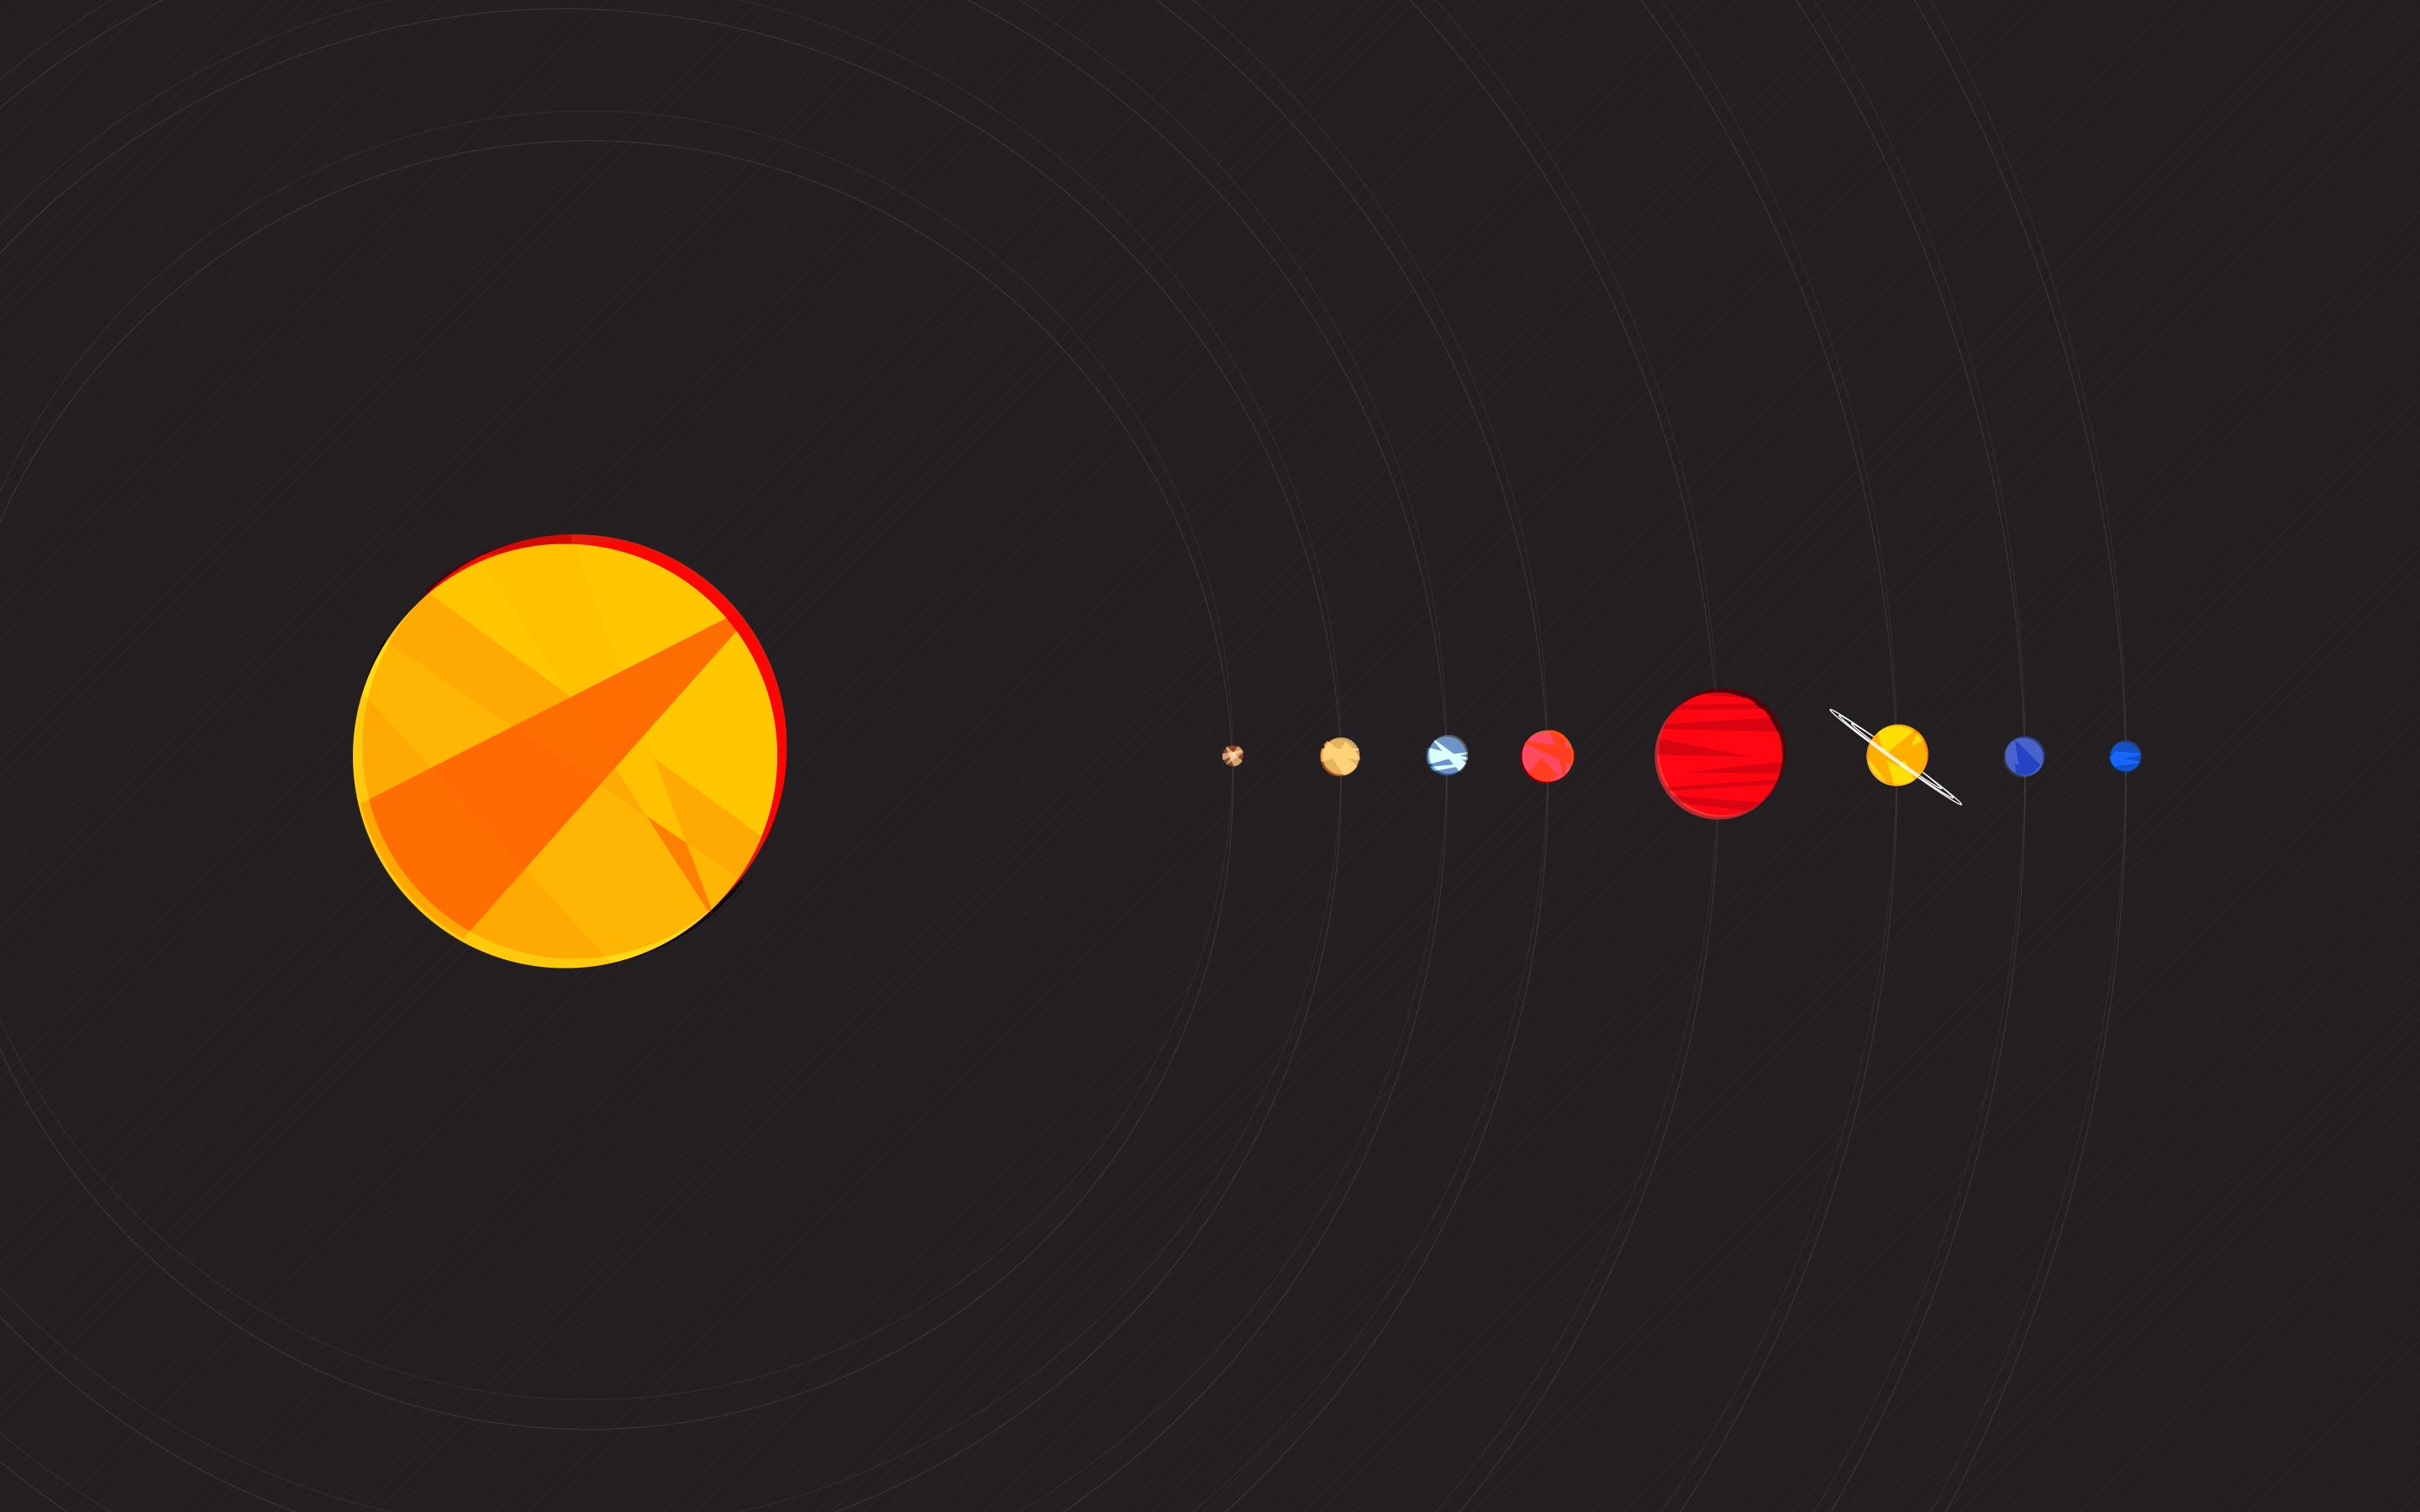 Sci Fi Solar System HD Wallpaper | Background Image